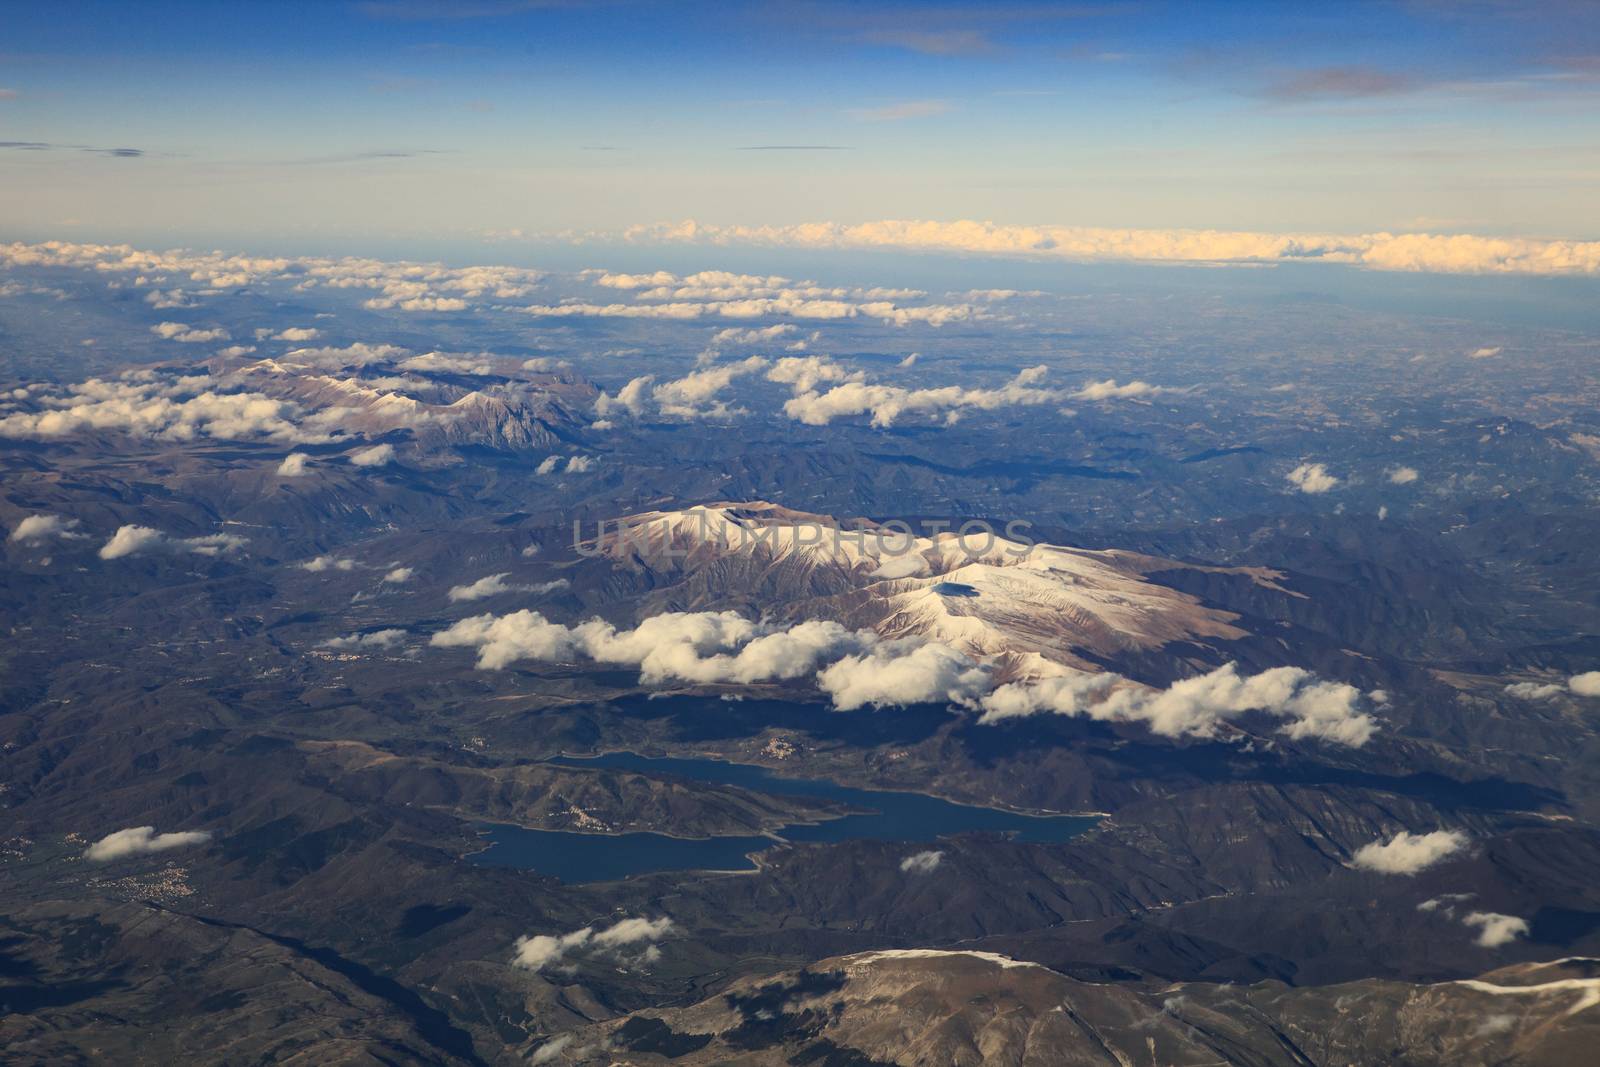 landscape from plane window of high mountain in italy after plane taking from Fiumicino Leonardo da Vinci International Airport 